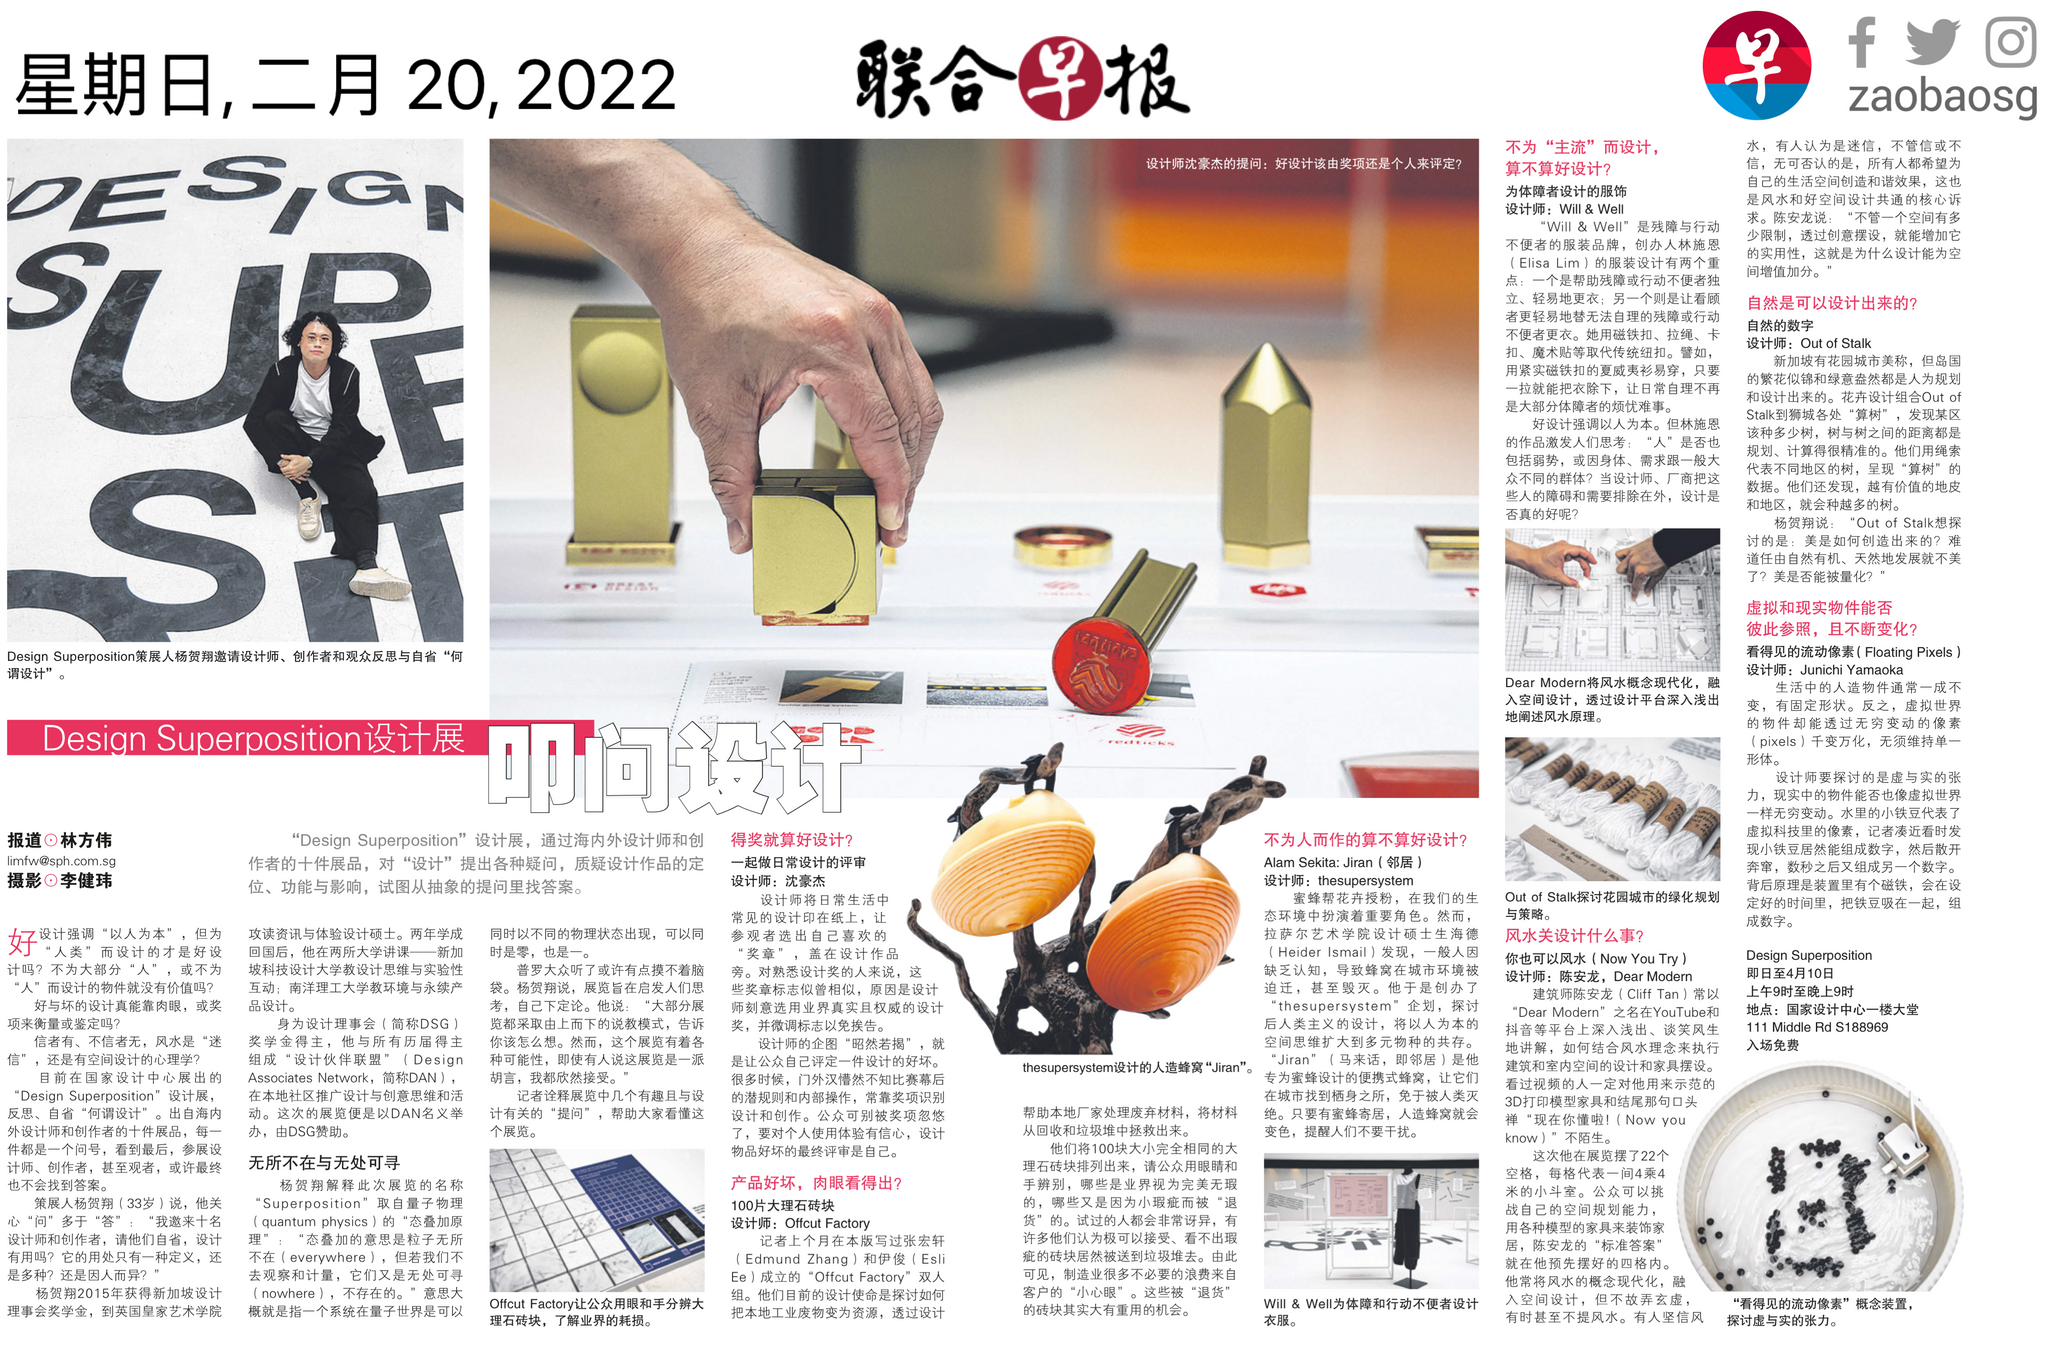 Full article by Lianhe Zaobao